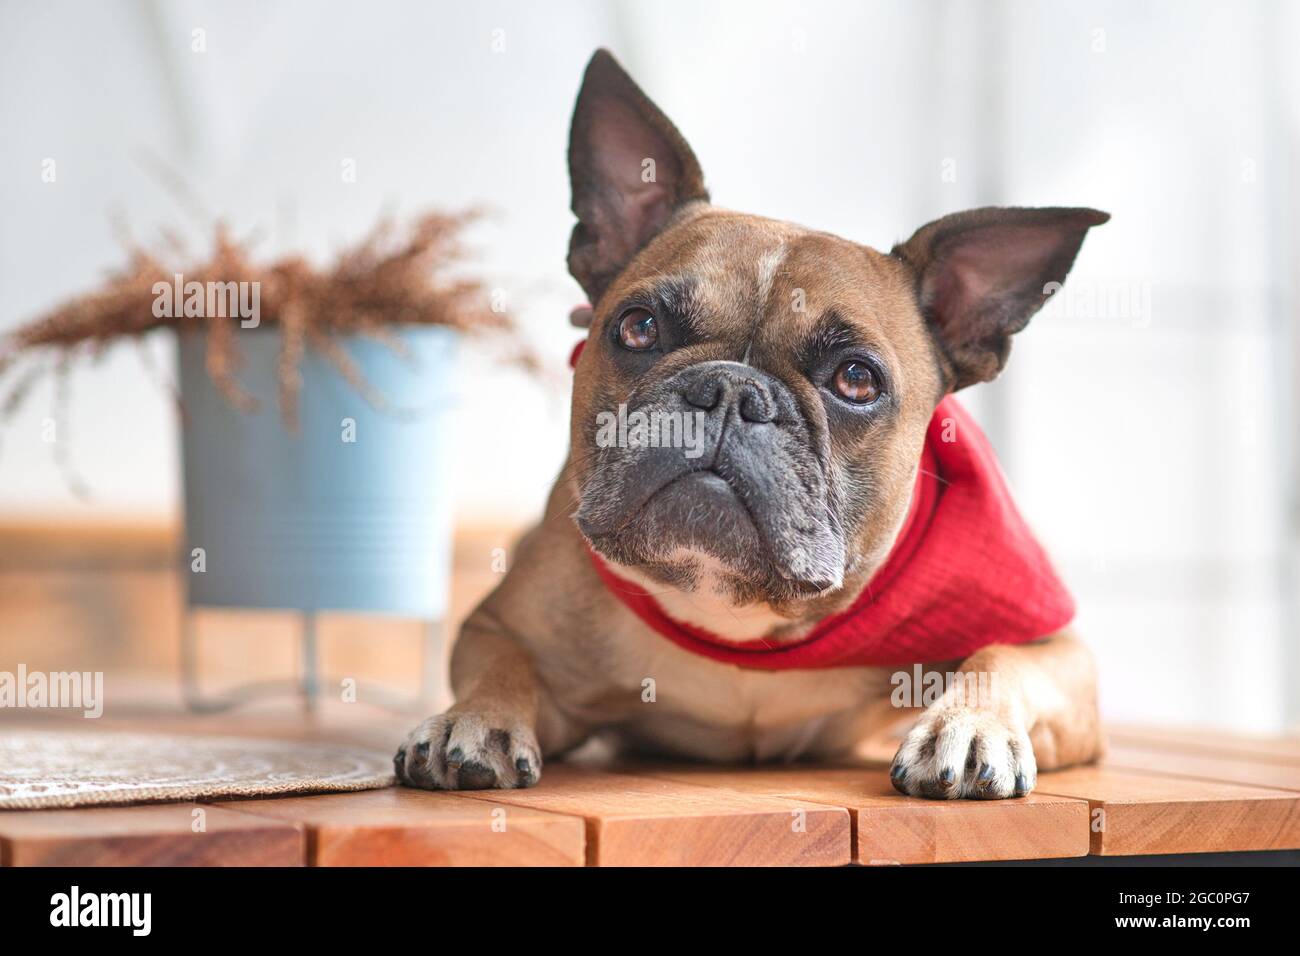 Cute curious French Bulldog dog with pointy ears wearing a red neckerchief while lying down Stock Photo